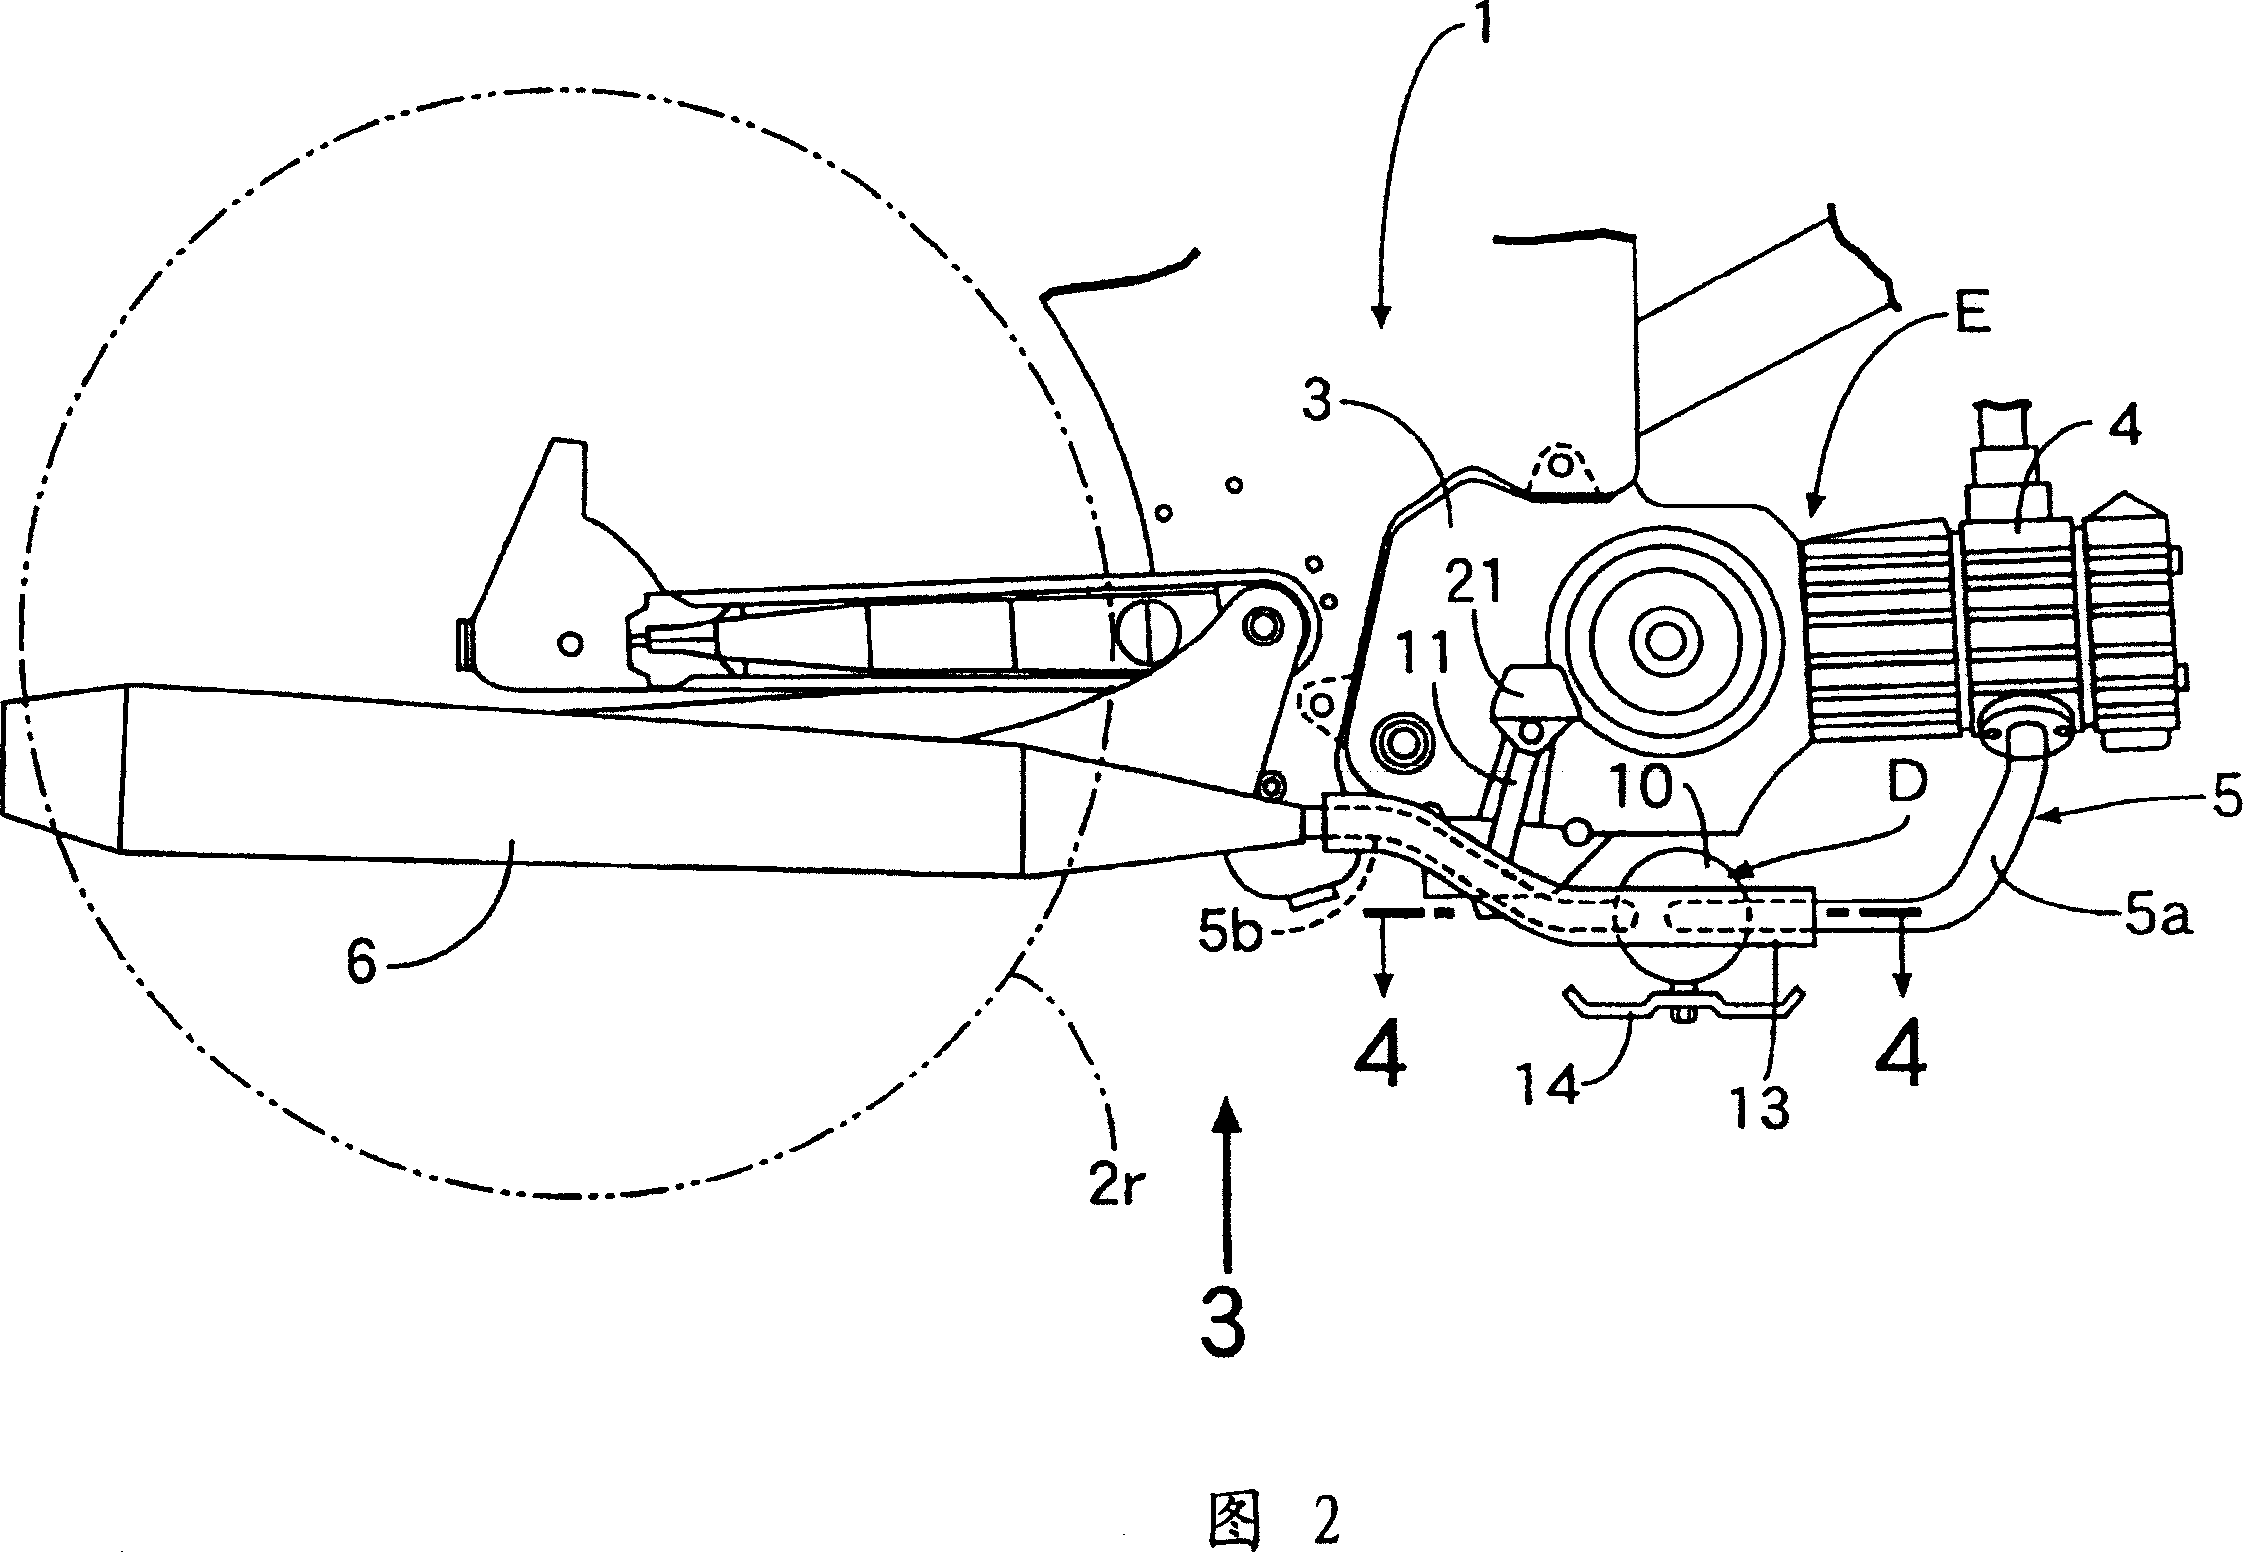 Exhaust purifying device for motor